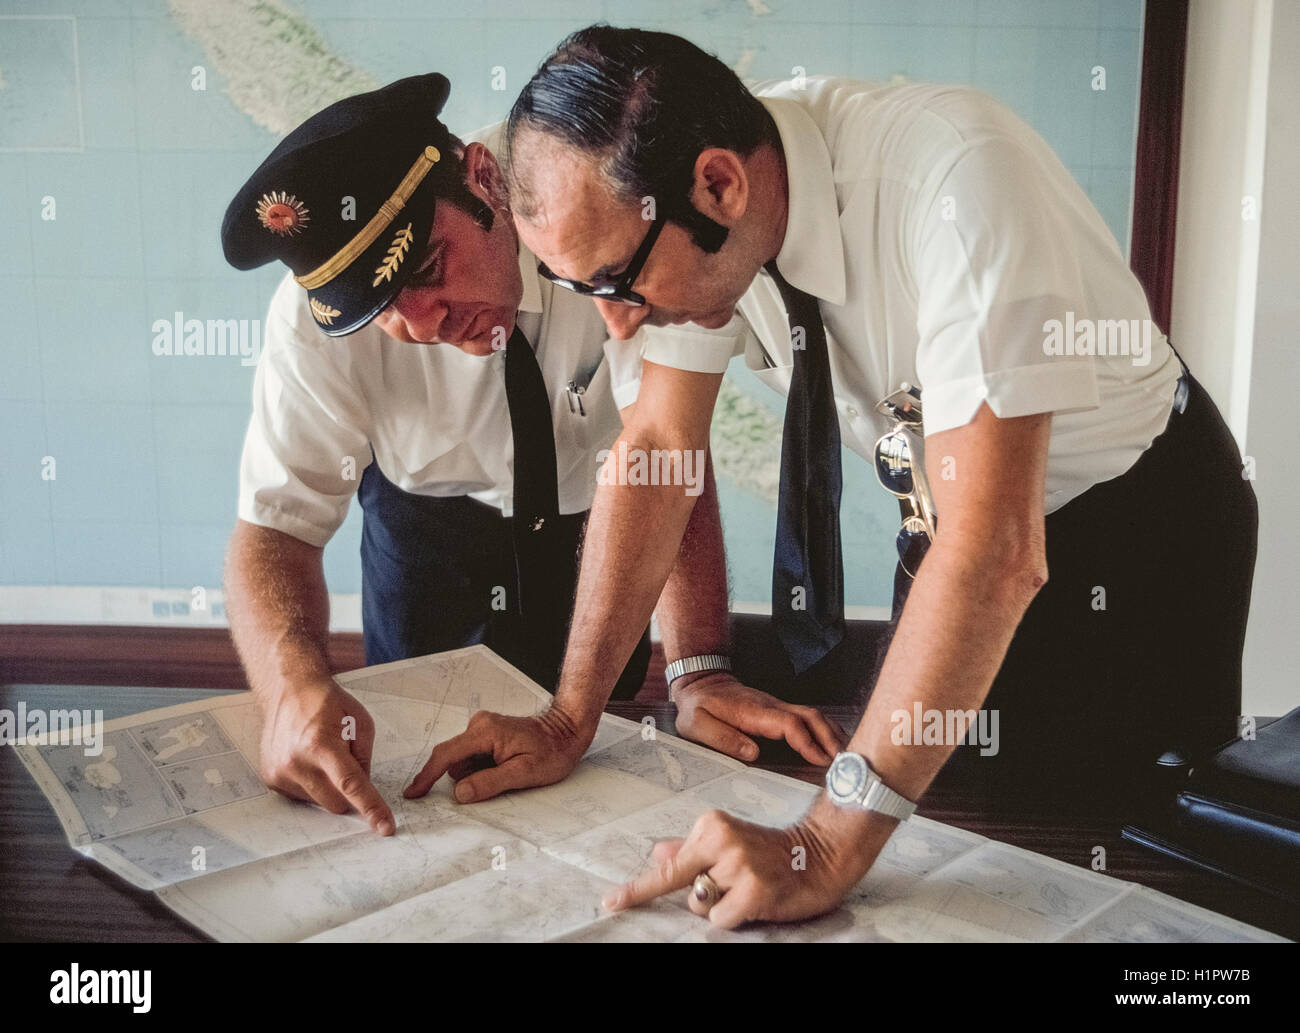 Captain Ross Zimmerman and copilot James McKenna study a map before embarking with their Convair 990 jet to fly a Modern Air Transport charter named 'Polar Bird II.' The plane carried 48 passengers via the North Pole and South Pole on a unique 32-day around-the-world tour organized by Hemphill World Air Cruises of Los Angeles, California, for the Travelers' Century Club. It was the most expensive world tour of the time (1970) at $9,760 per person. Stock Photo